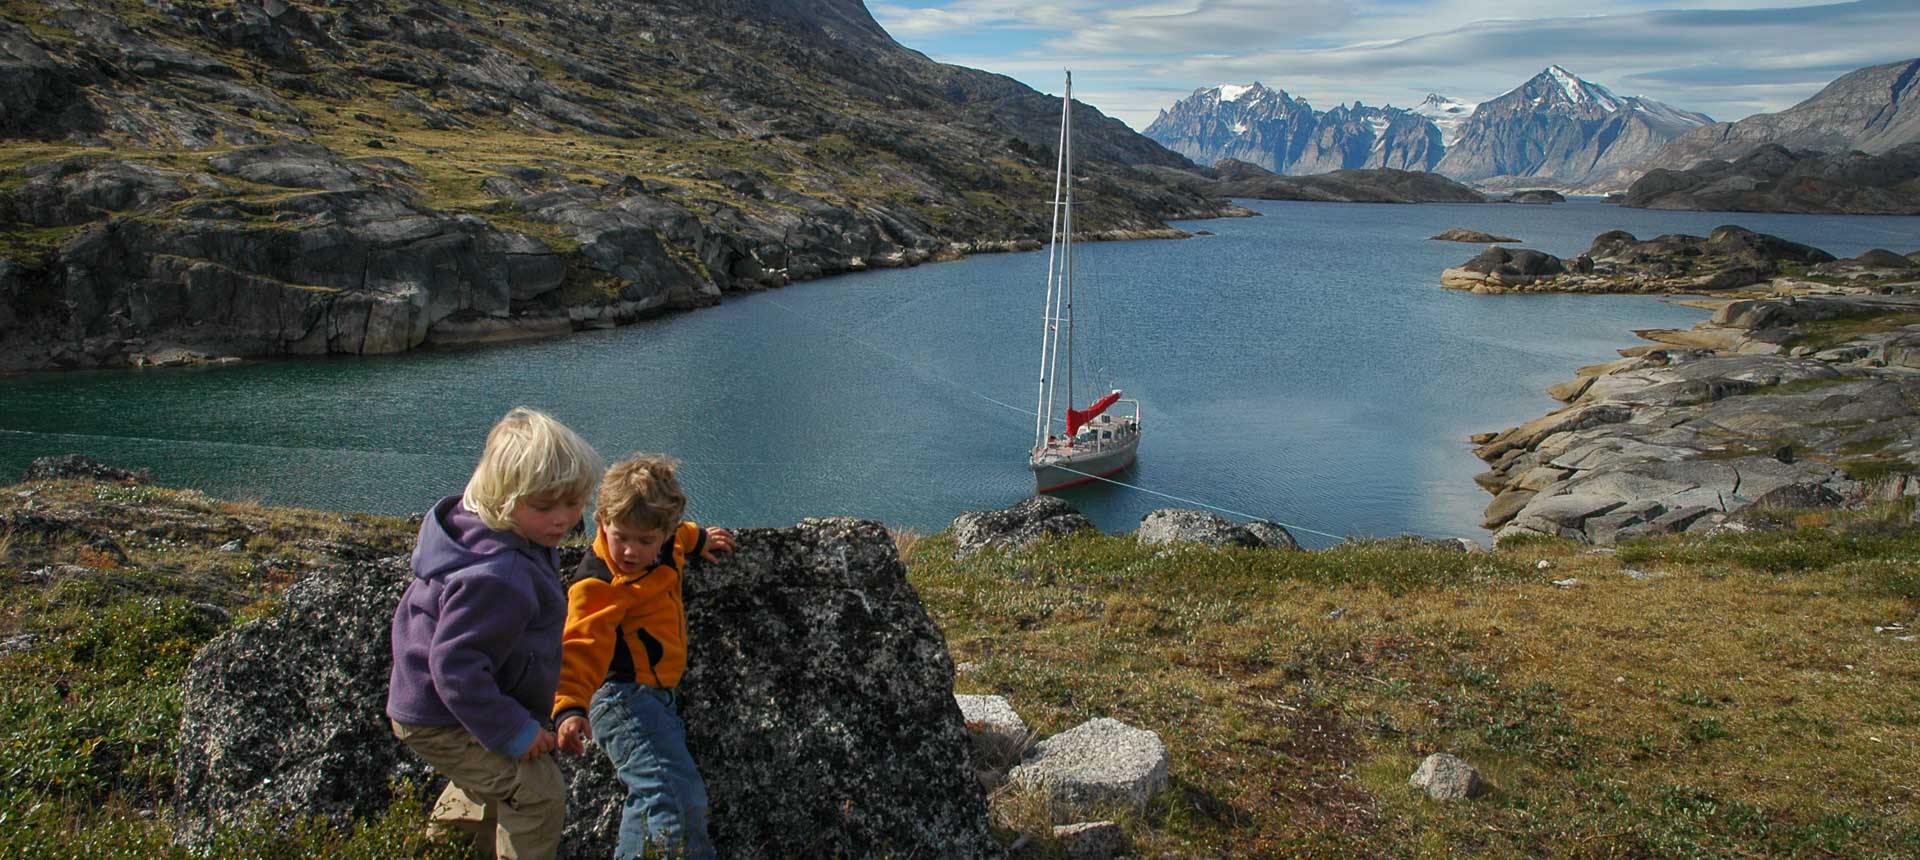 Expedition Yacht Seal sailing in Greenland